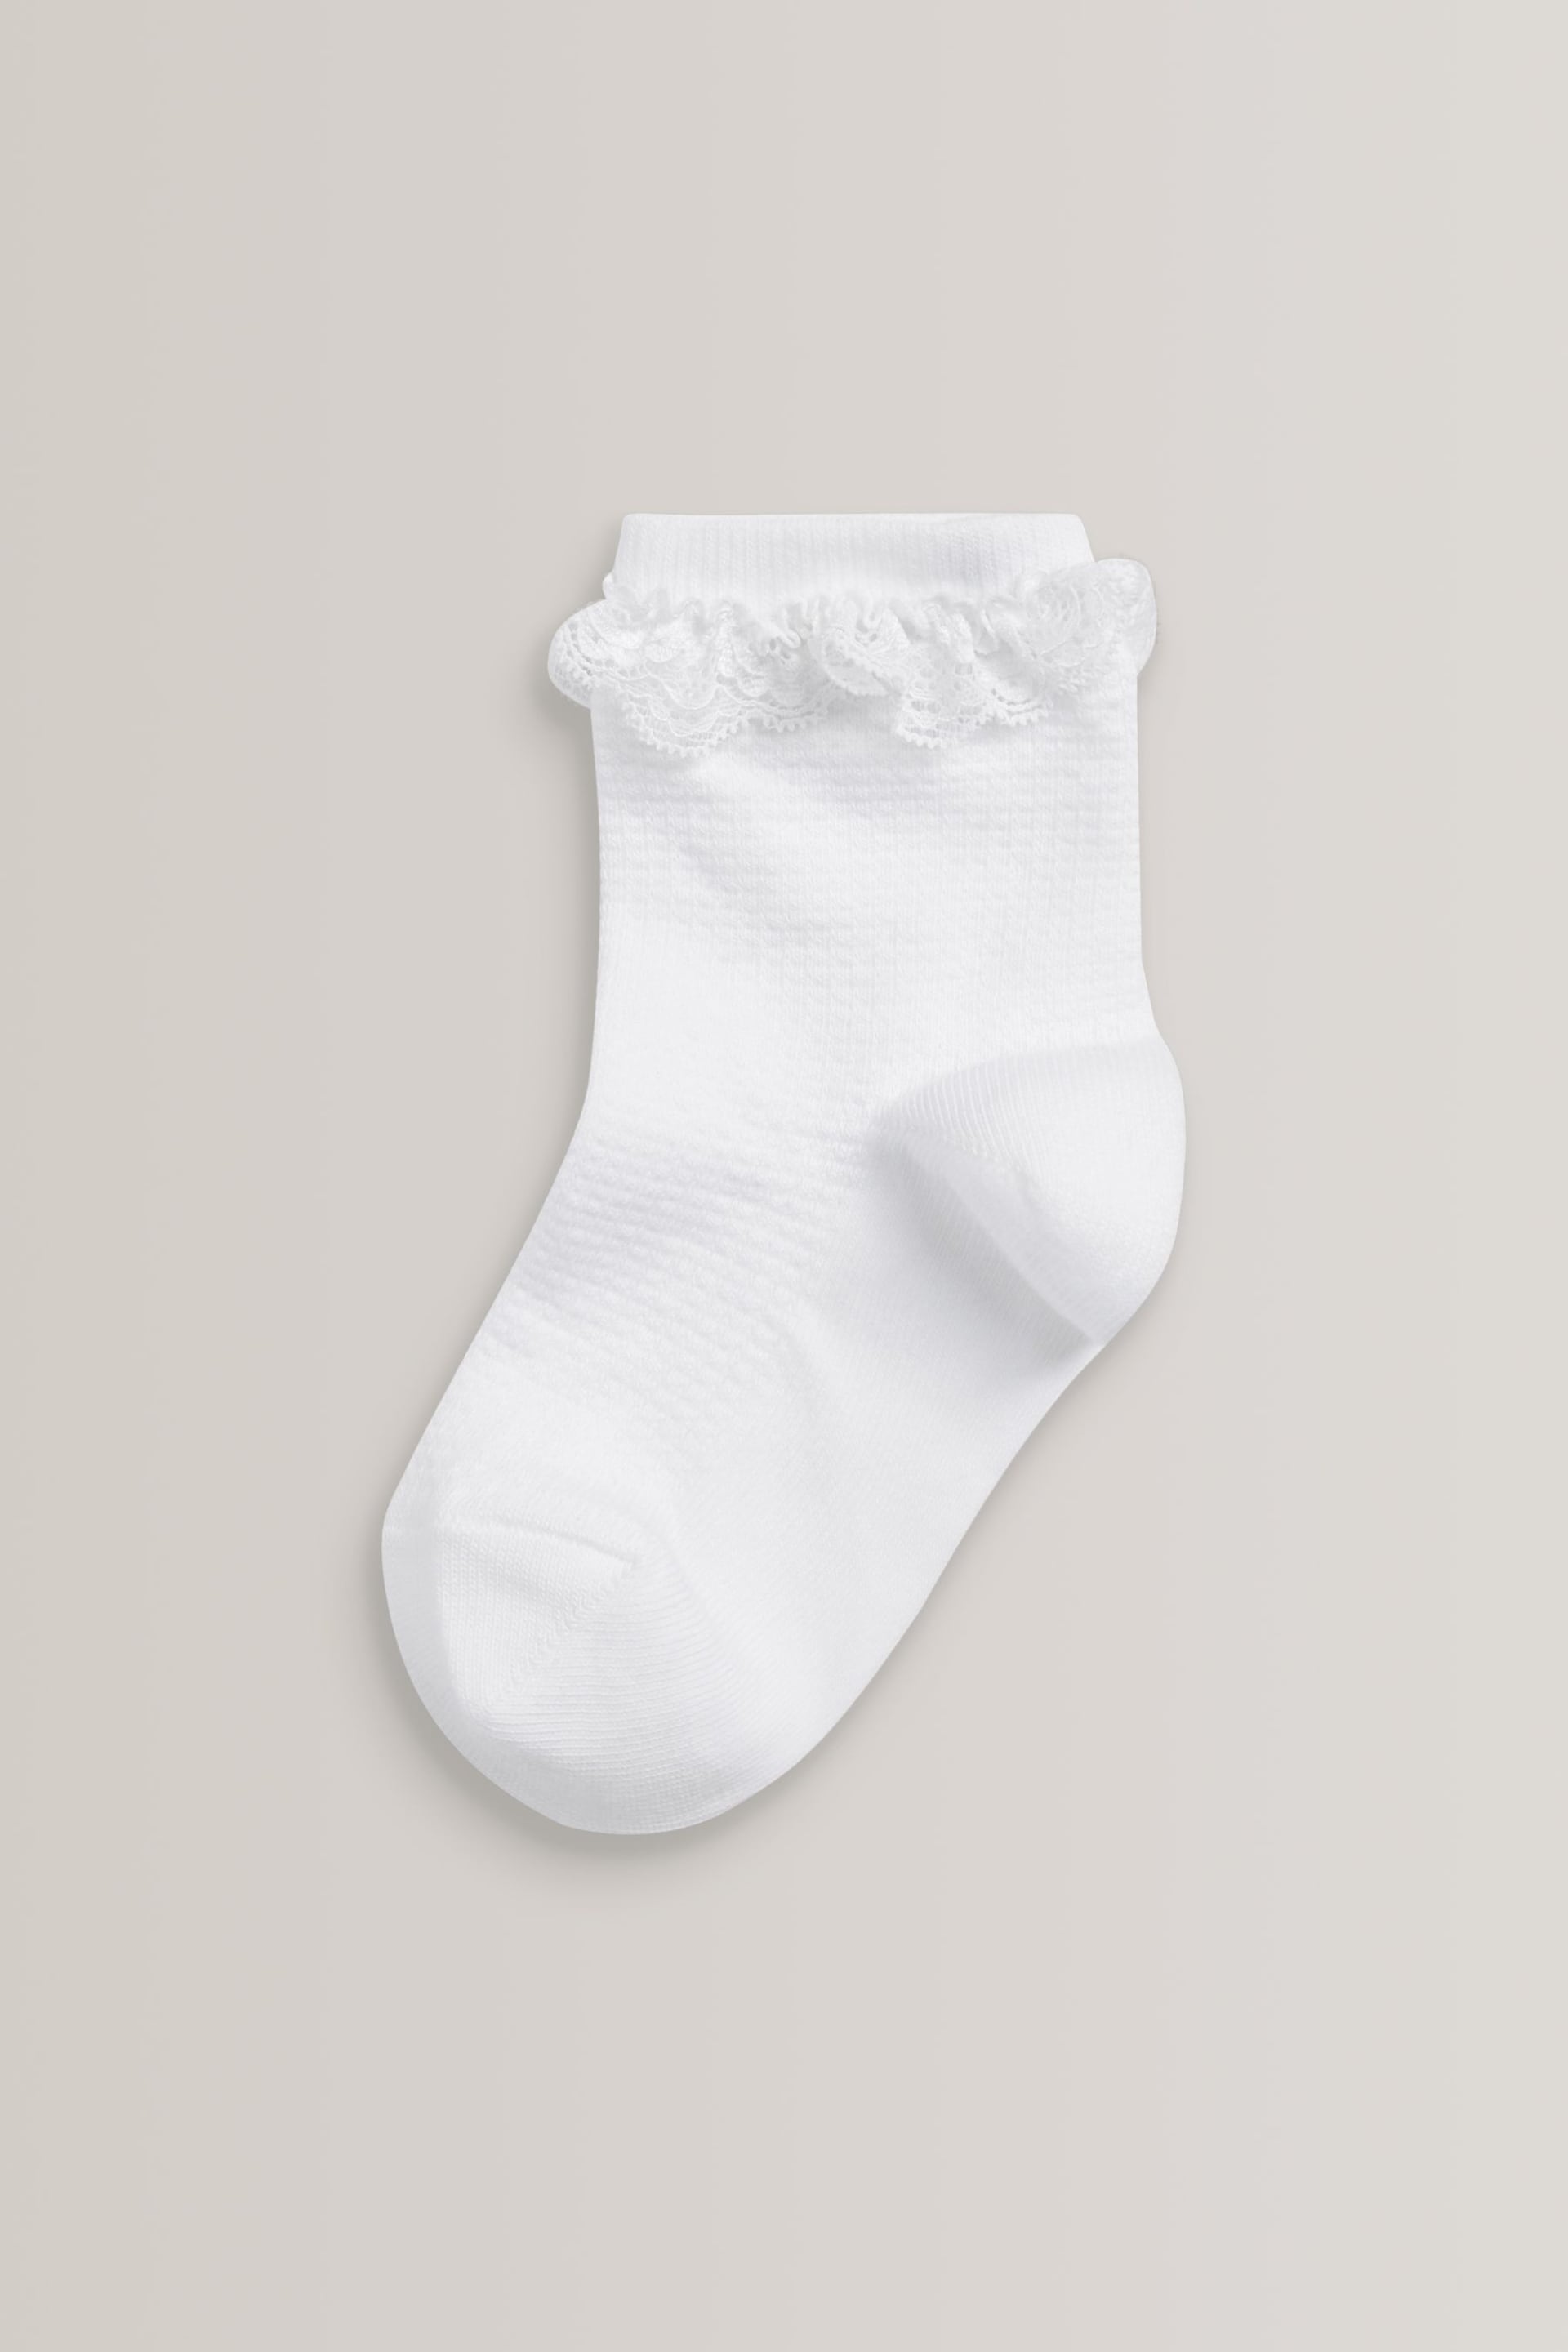 White 5 Pack Cotton Rich Ruffle Ankle Socks - Image 2 of 2